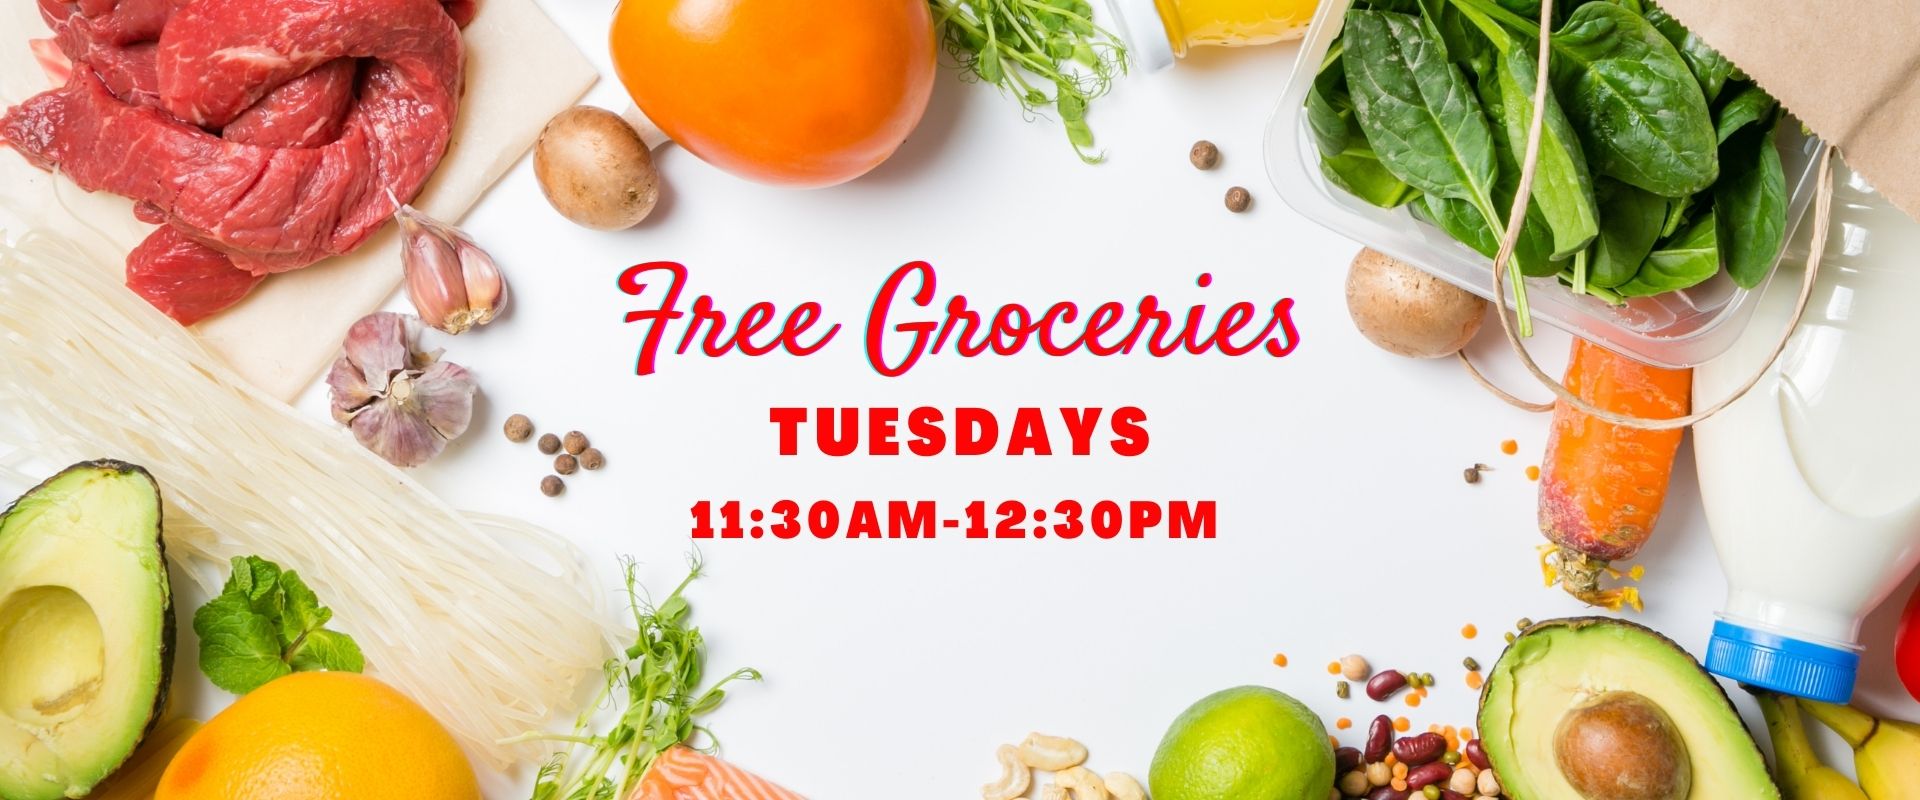 A poster on Free Groceries on Tuesdays